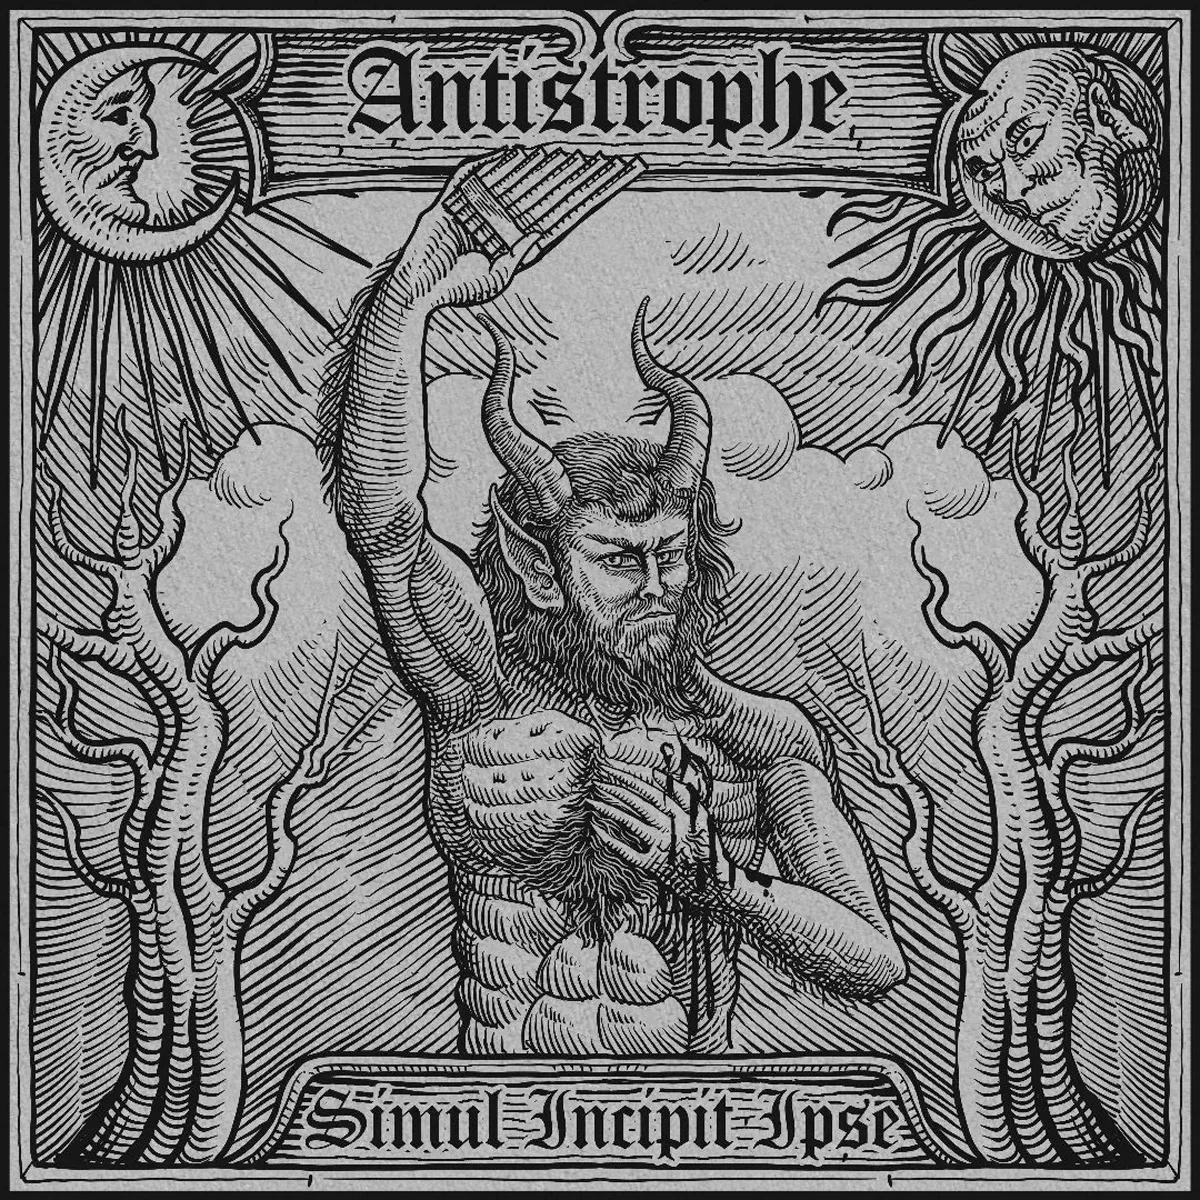 ANTISTROPHE / “Notus and the Torn Chlamys”